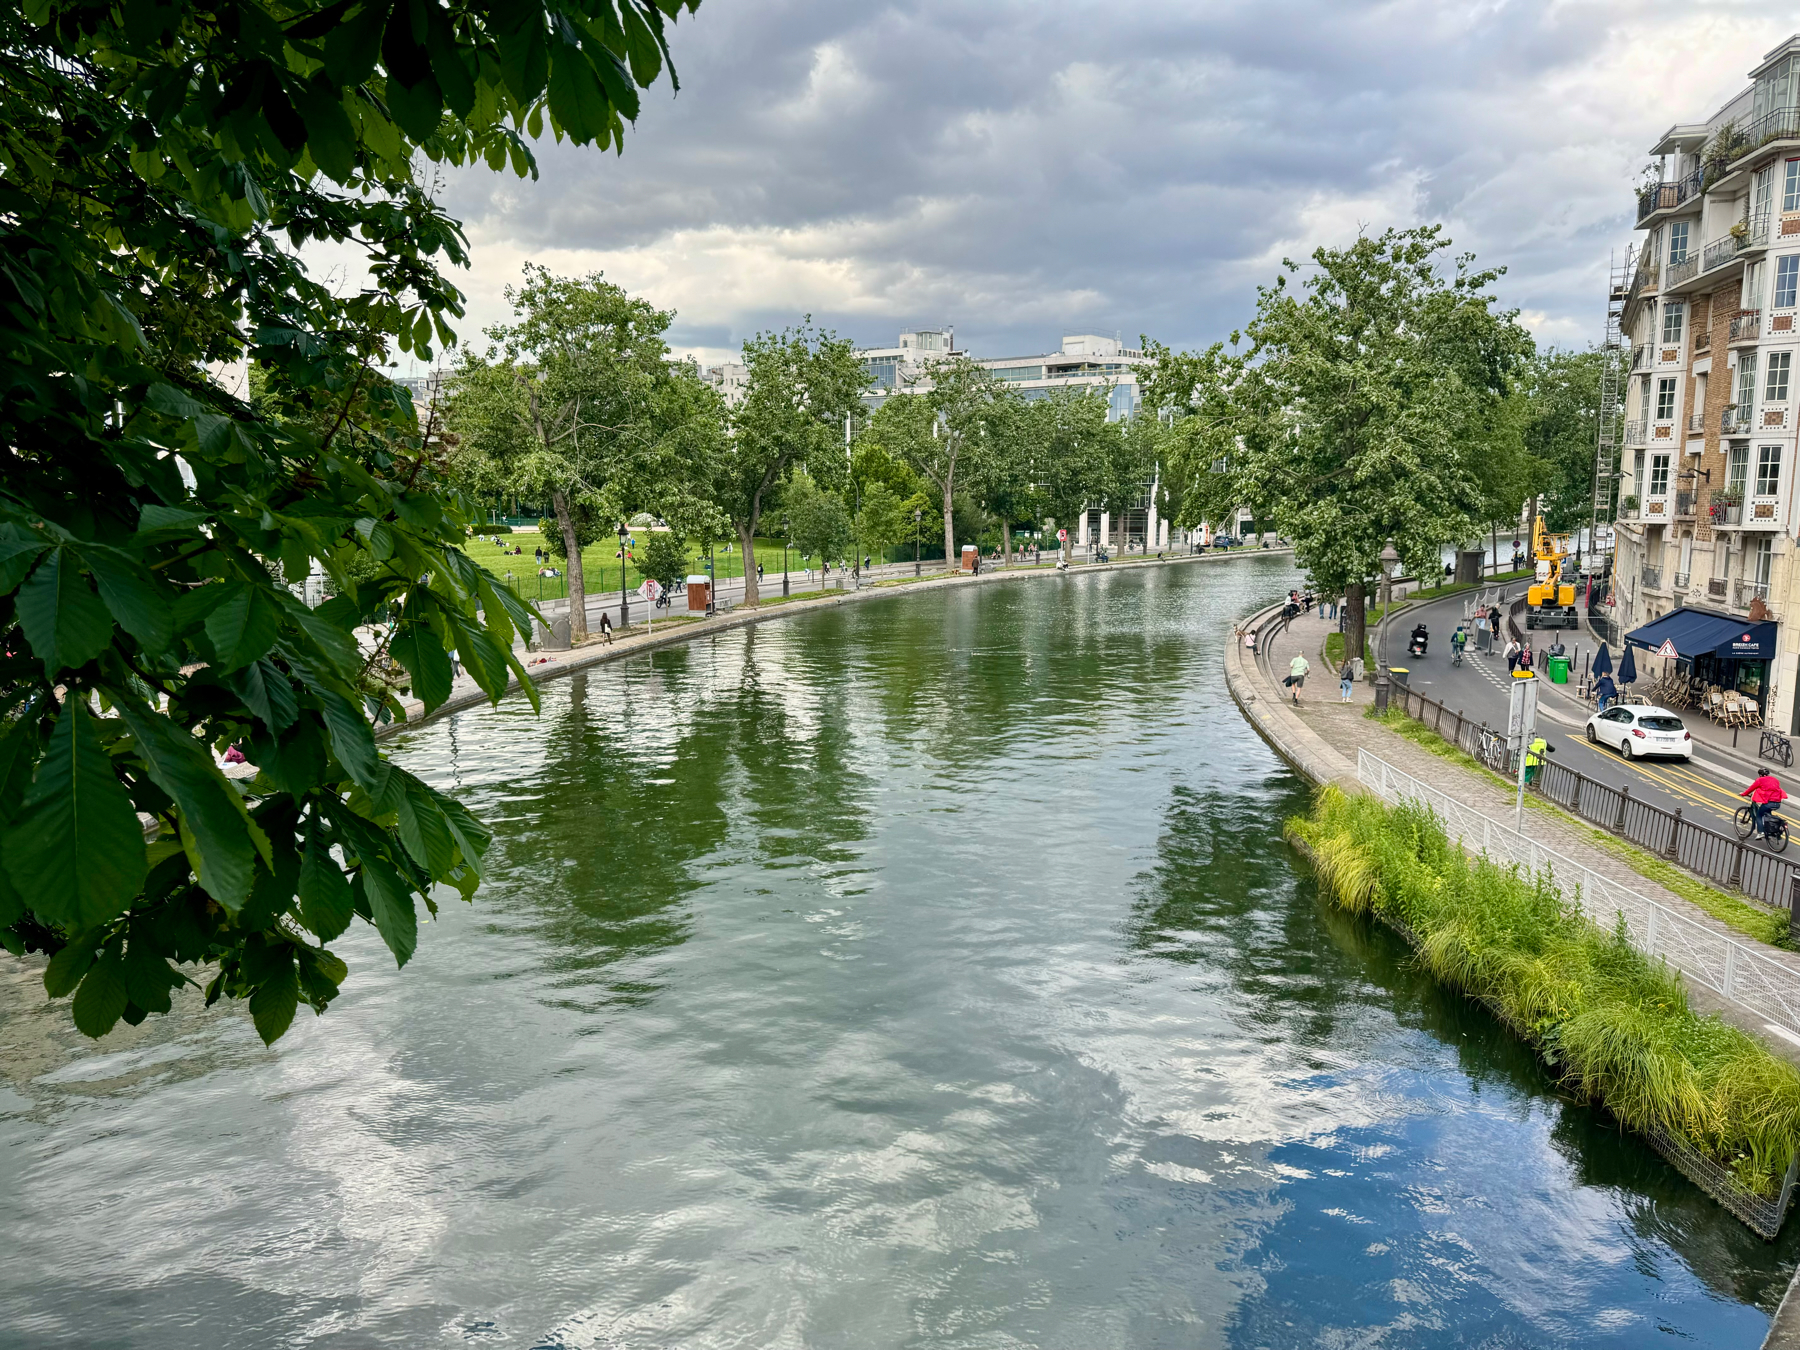 A scenic view of a canal with clear water, bordered by a pedestrian walkway and a road with a few cars and cyclists. Trees and buildings line the opposite bank under a cloudy sky.